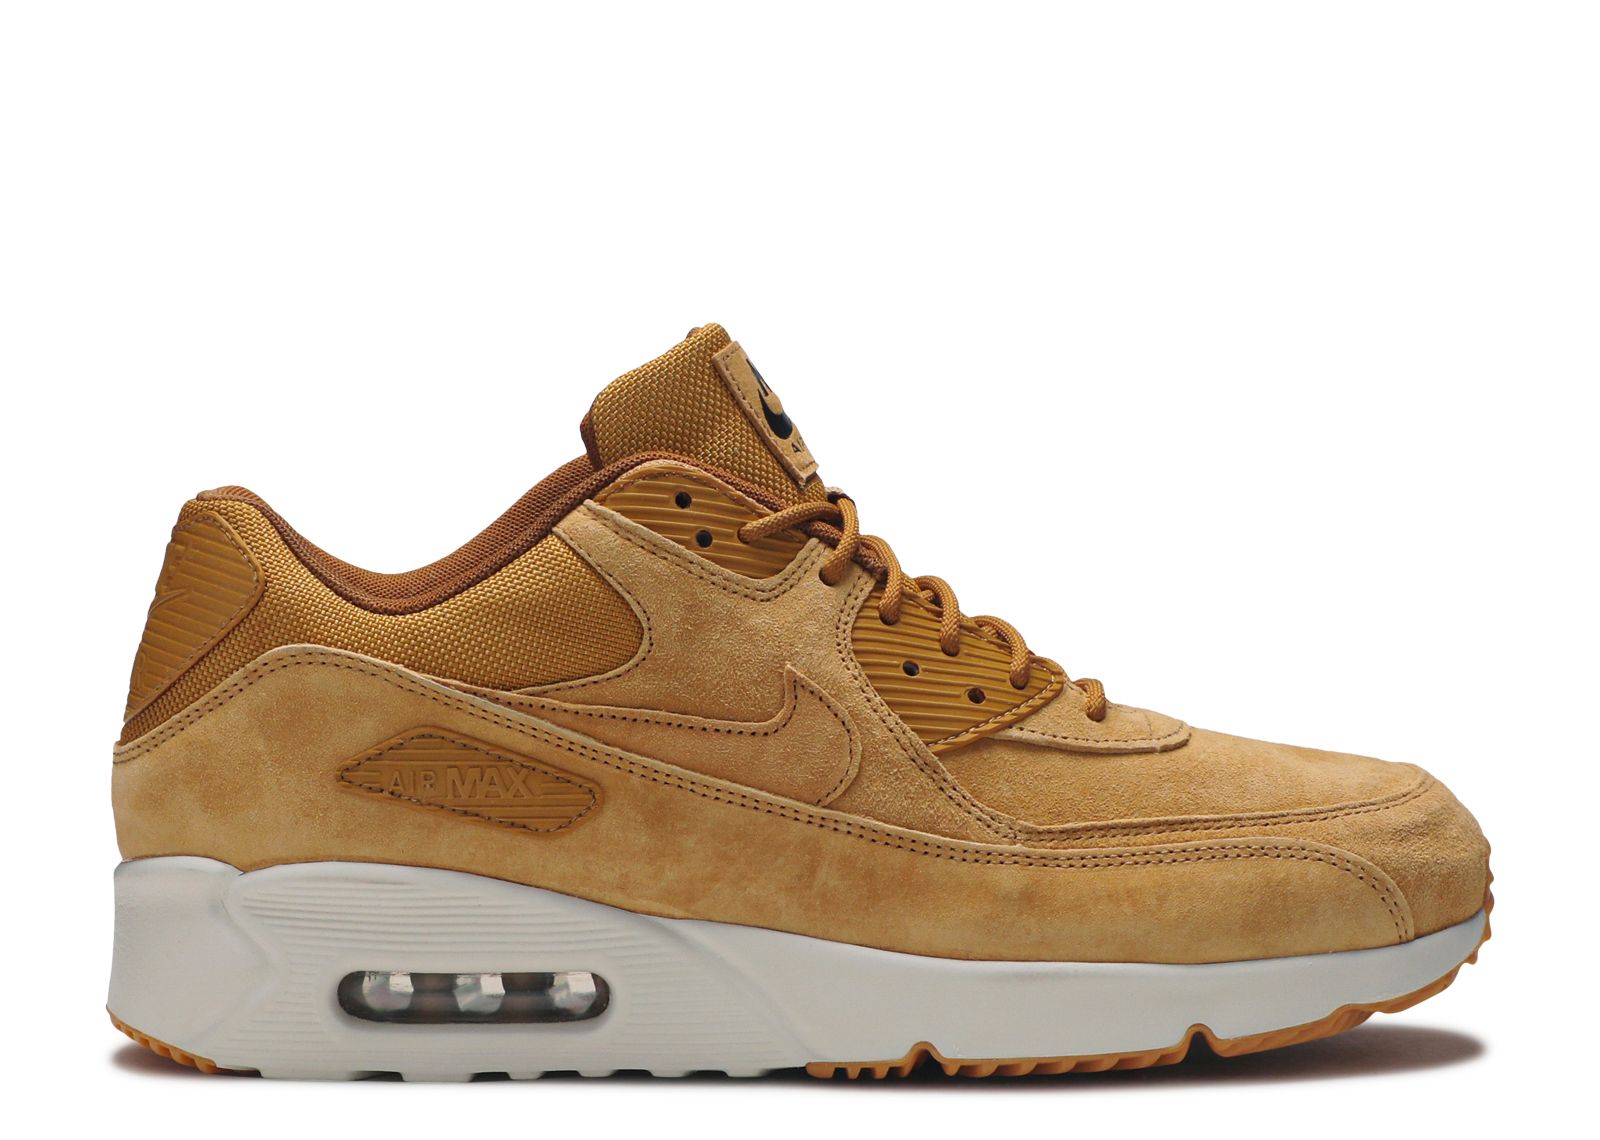 Air Max 90 Ultra 2.0 Leather 'Wheat Pack' ما هو